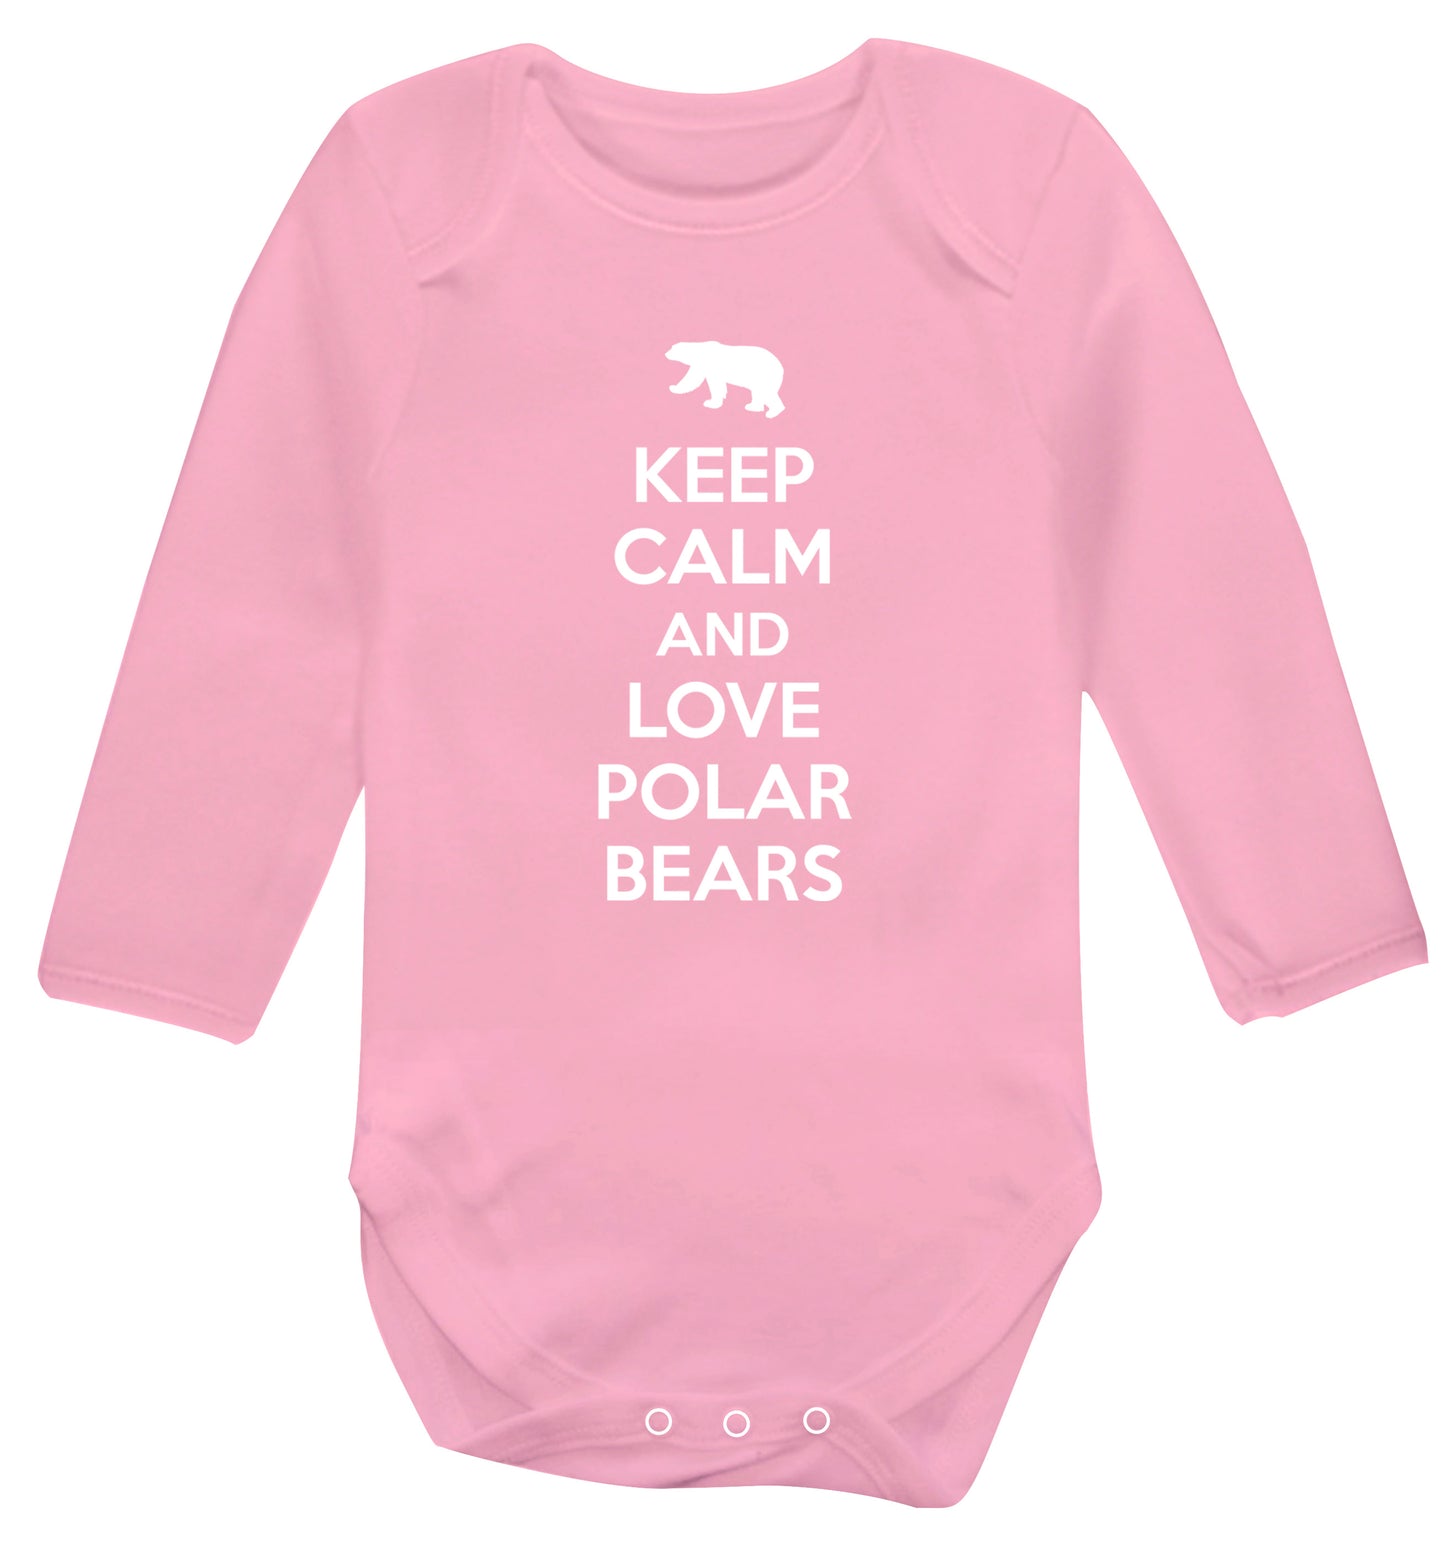 Keep calm and love polar bears Baby Vest long sleeved pale pink 6-12 months